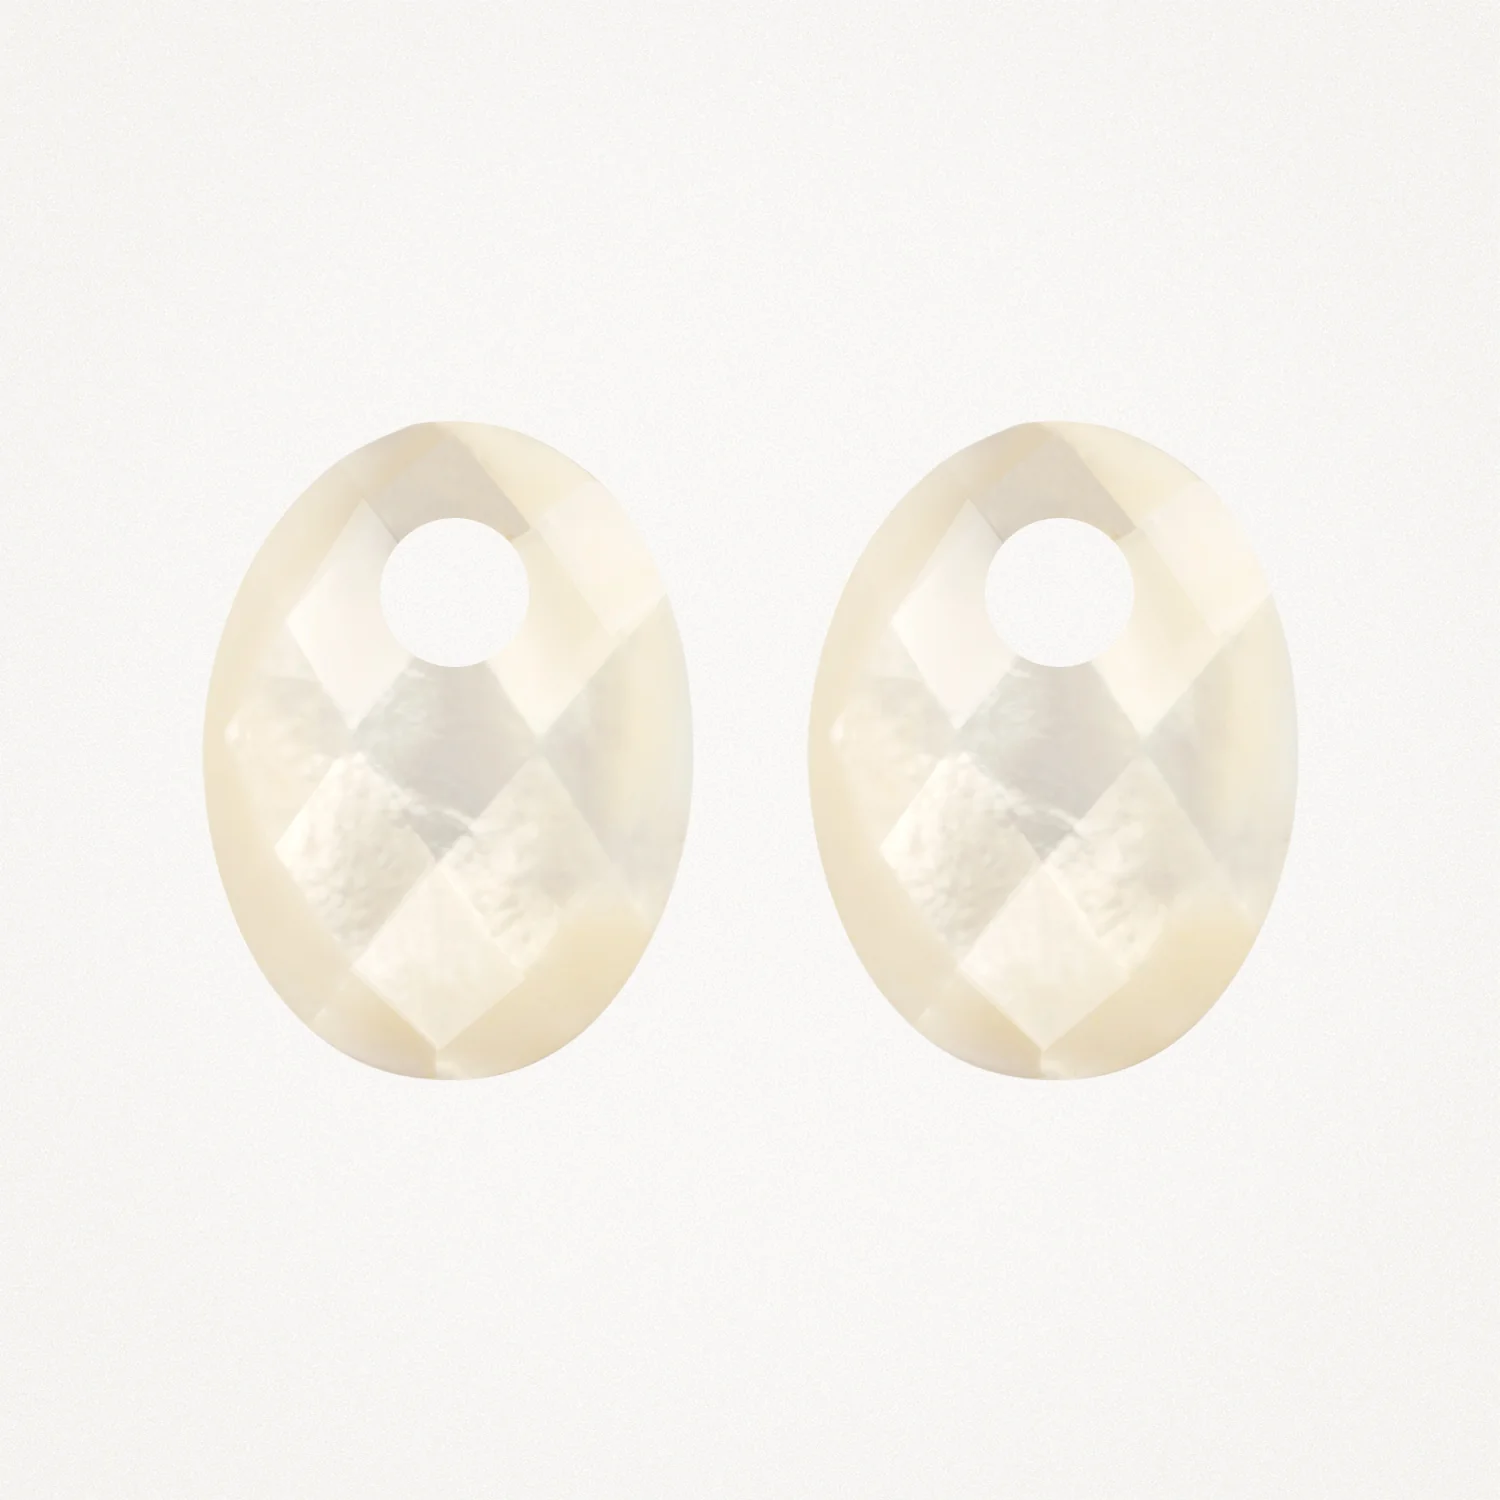 Blush Ear Charms - Oval Mother-of-Pearl